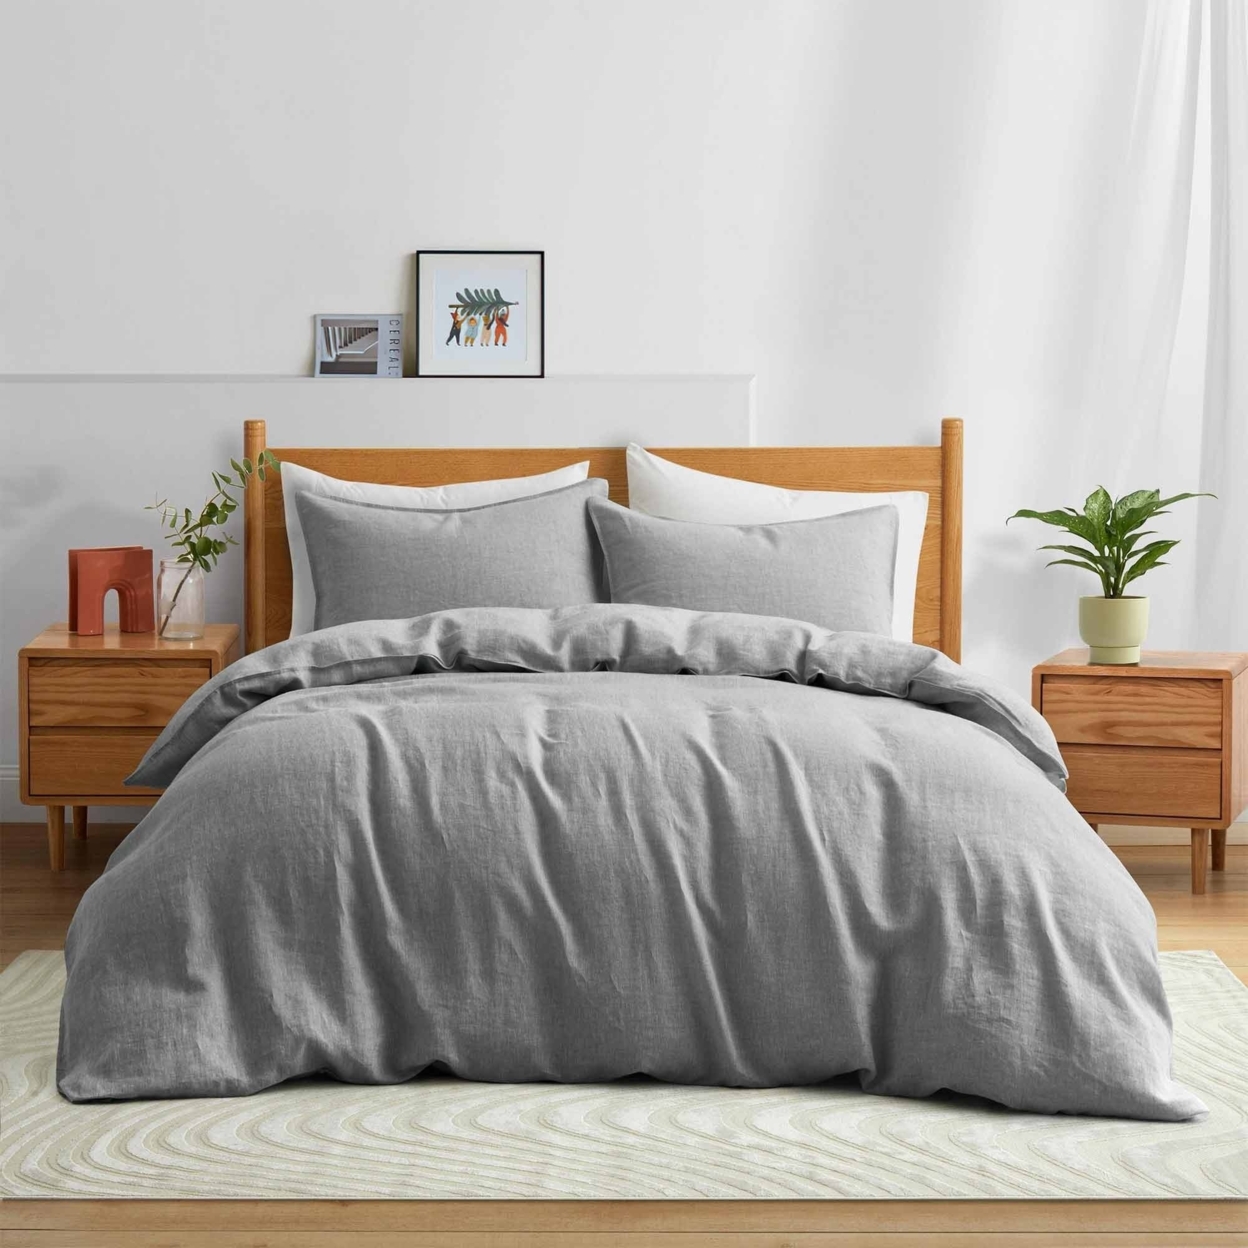 Premium Flax Linen Duvet Cover Set With Pillowcases Moisture Wicking And Breathable - Light Grey, Full/Queen